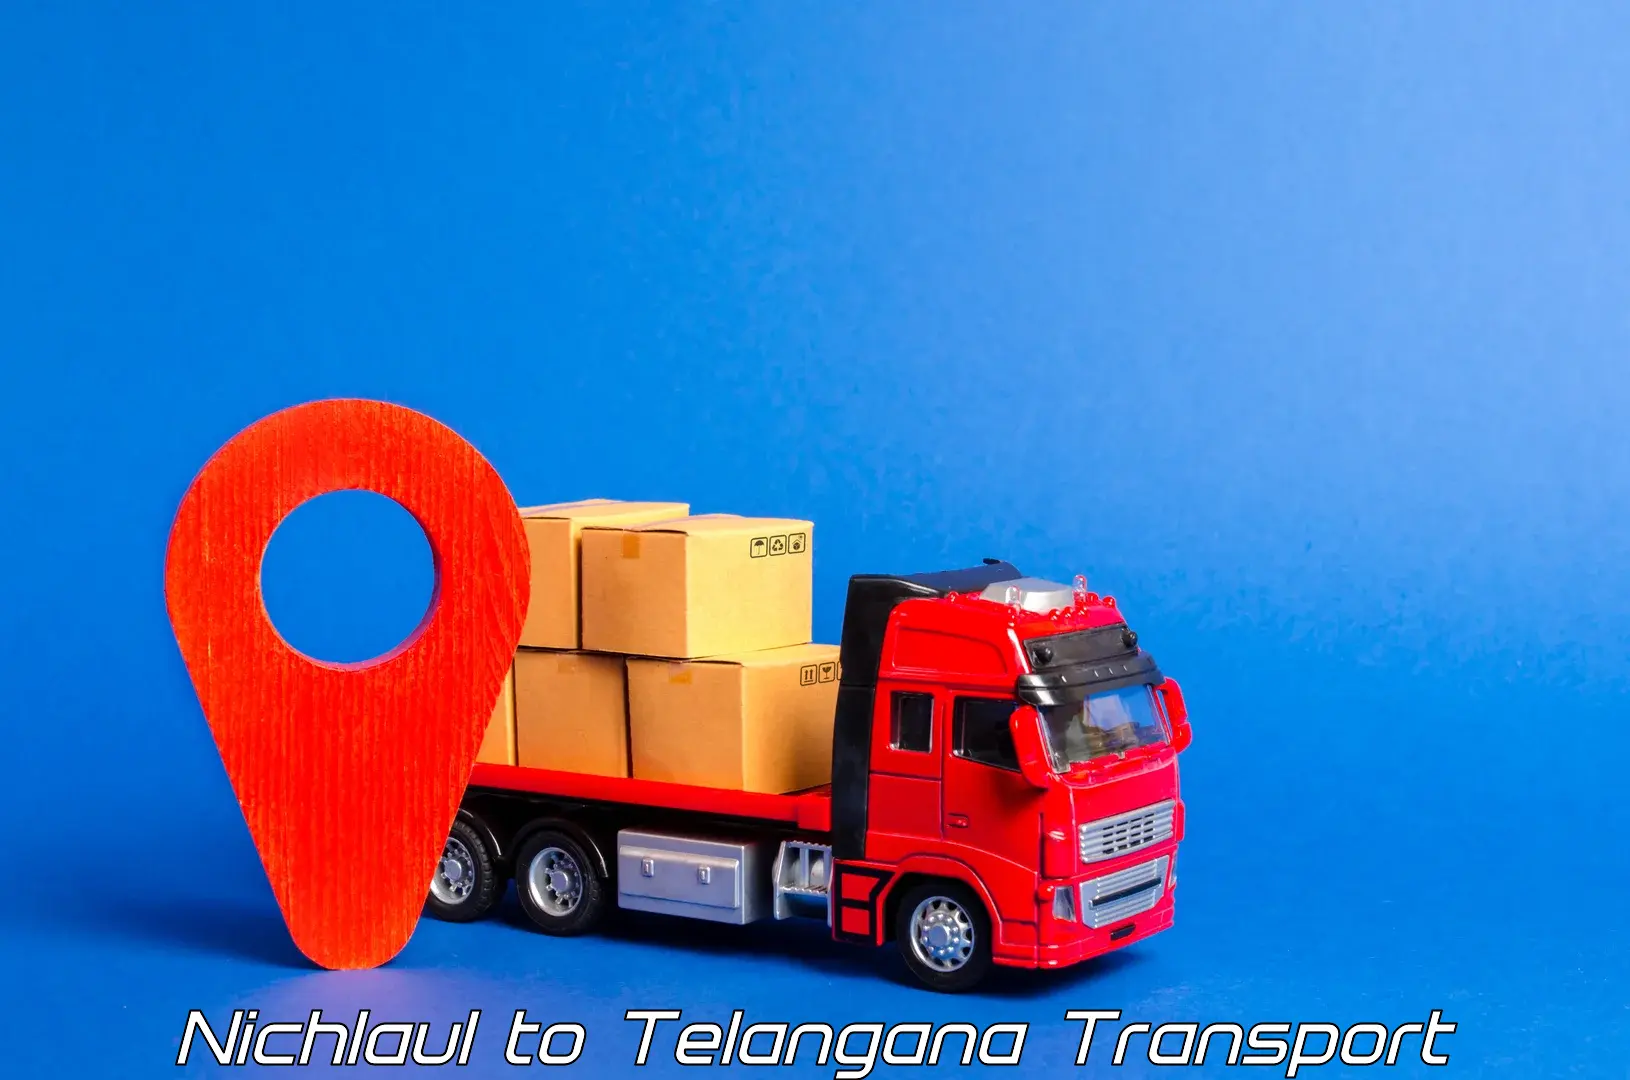 Land transport services in Nichlaul to Warangal